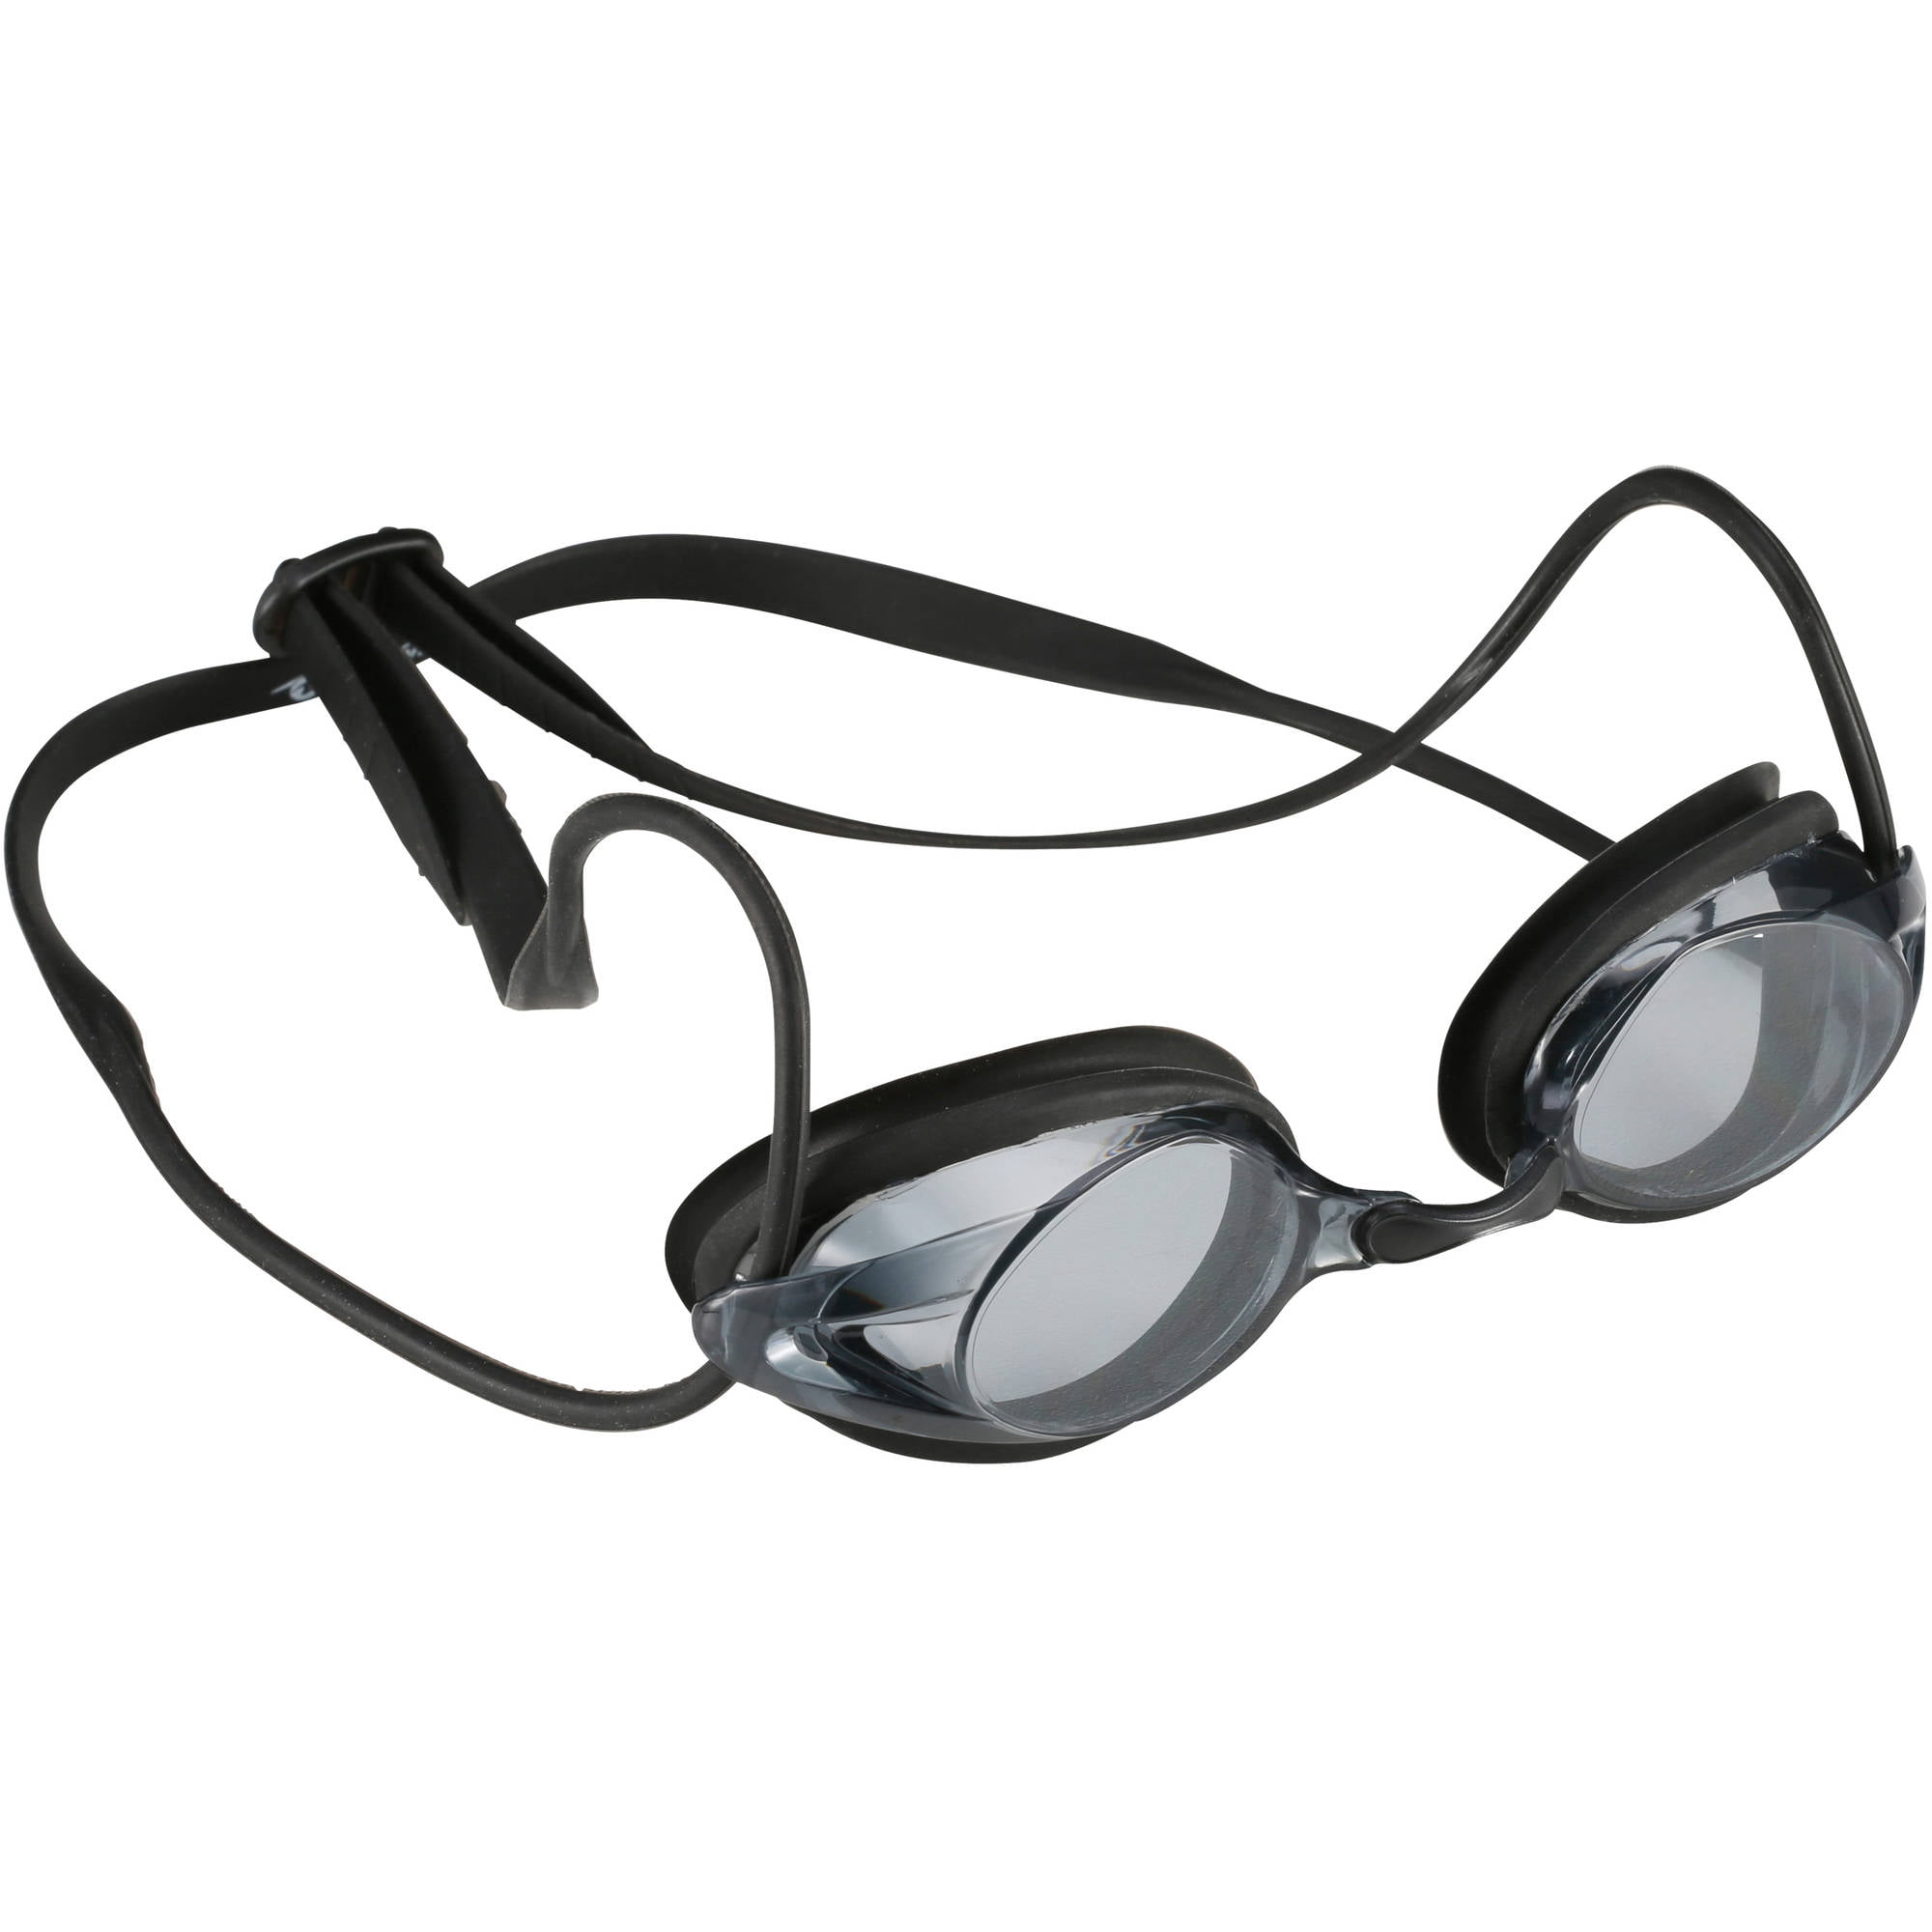 U.s Divers Express Mirror Competition Swim Goggle Adults Anti Fog UV for sale online 